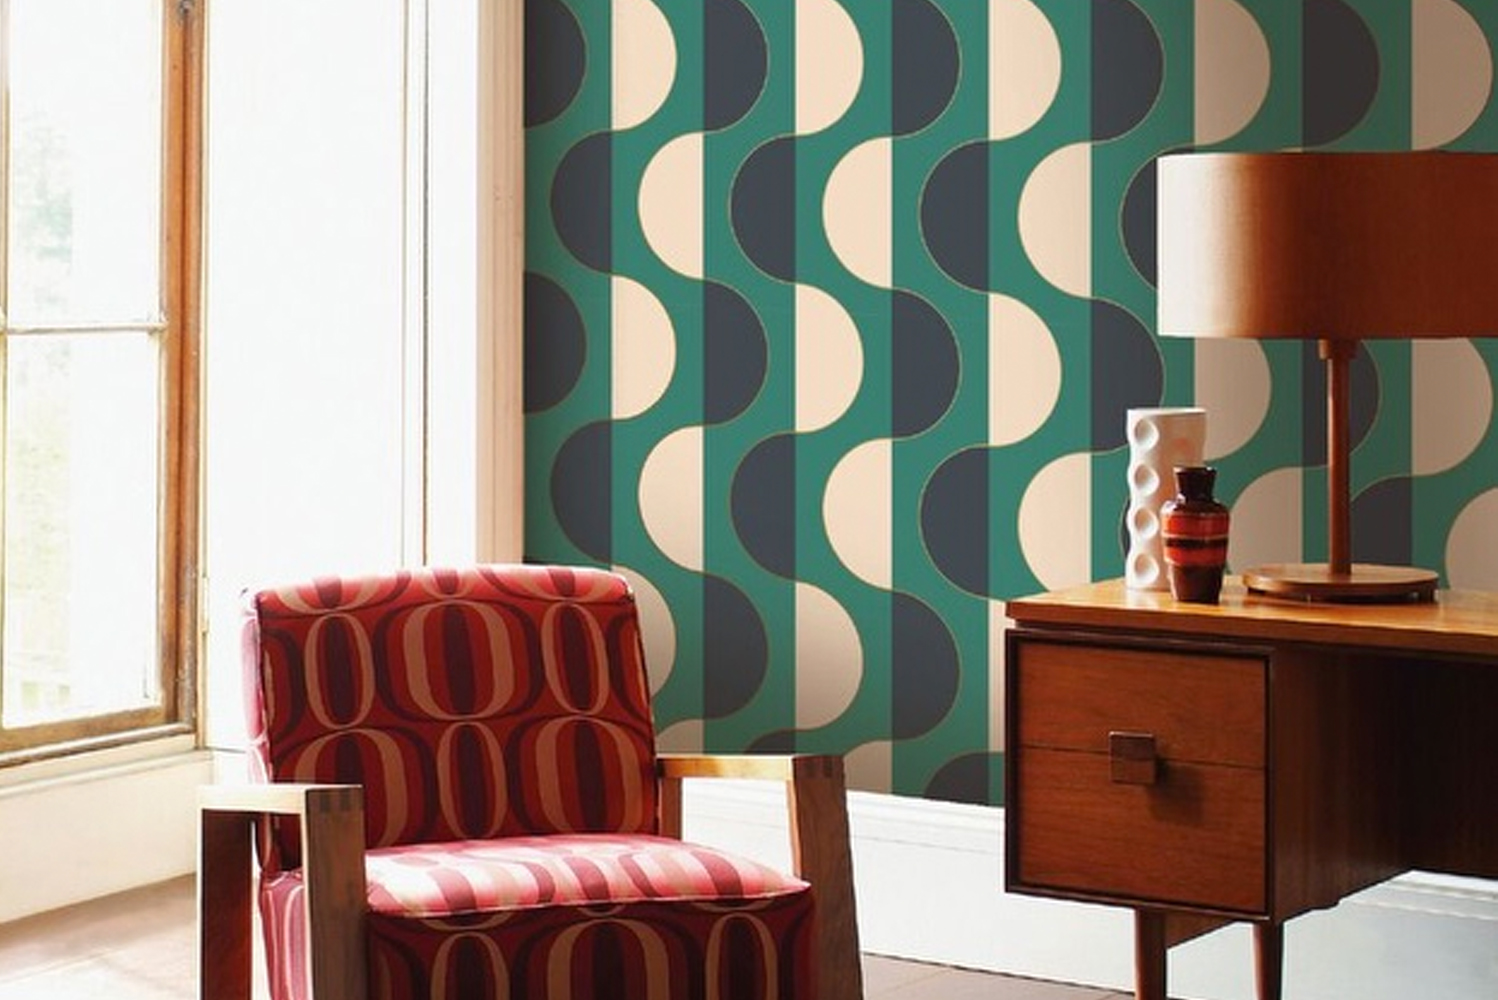 Tempaper launched self-adhesive wallcoverings 